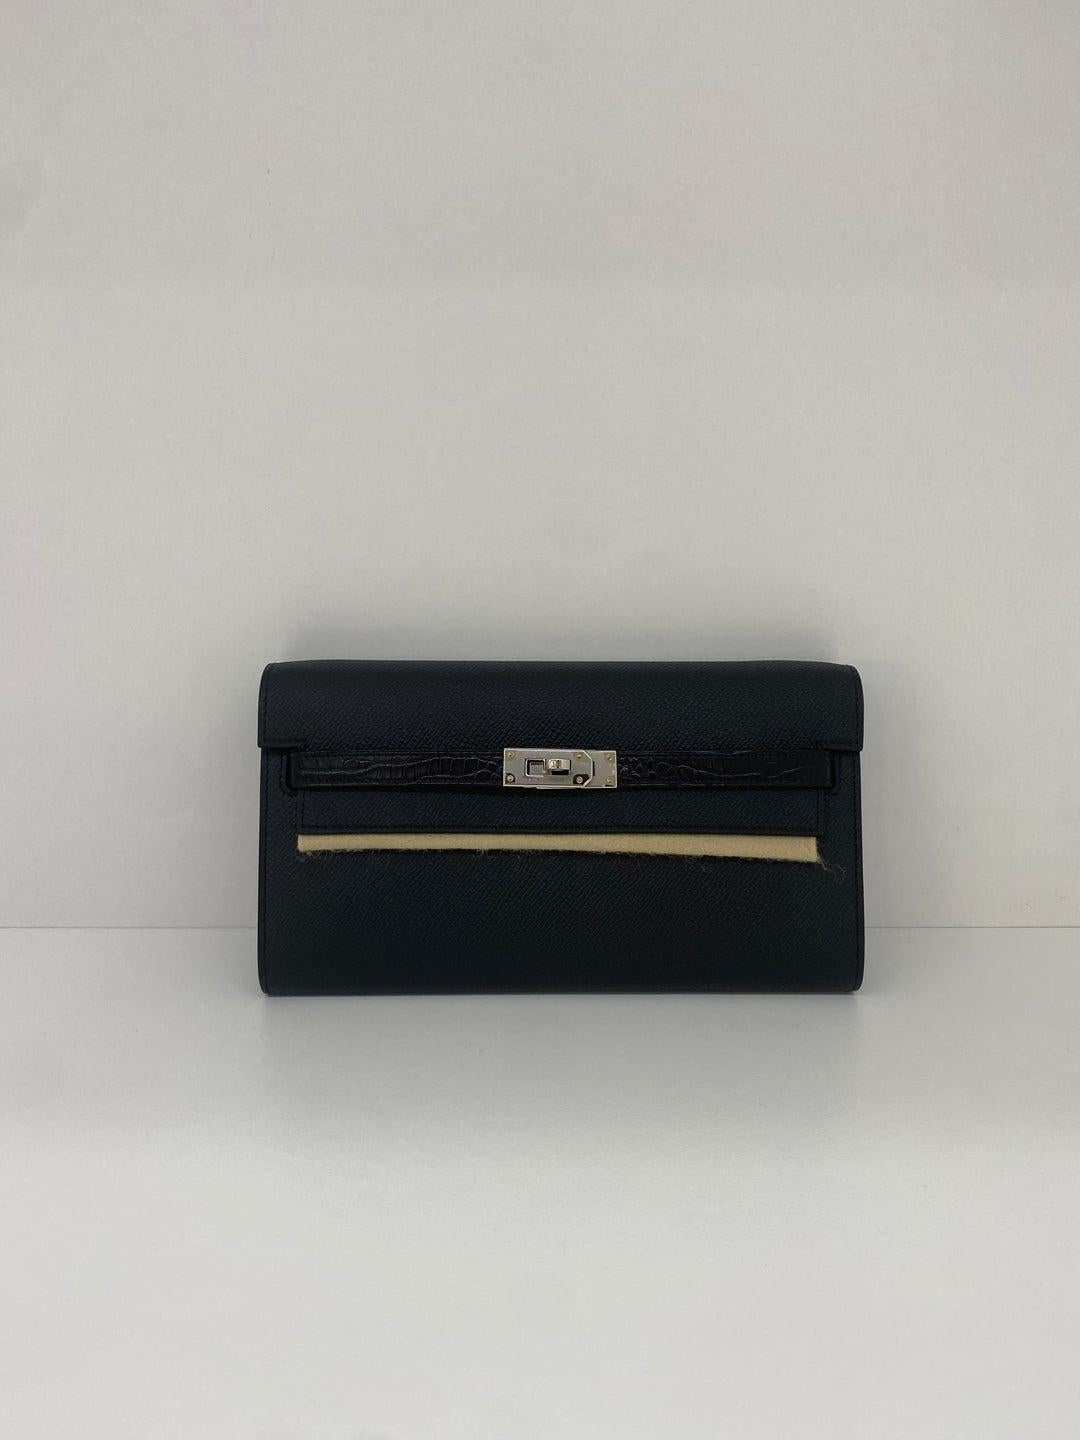 Hermes Kelly To Go Black Touch Alligator 1